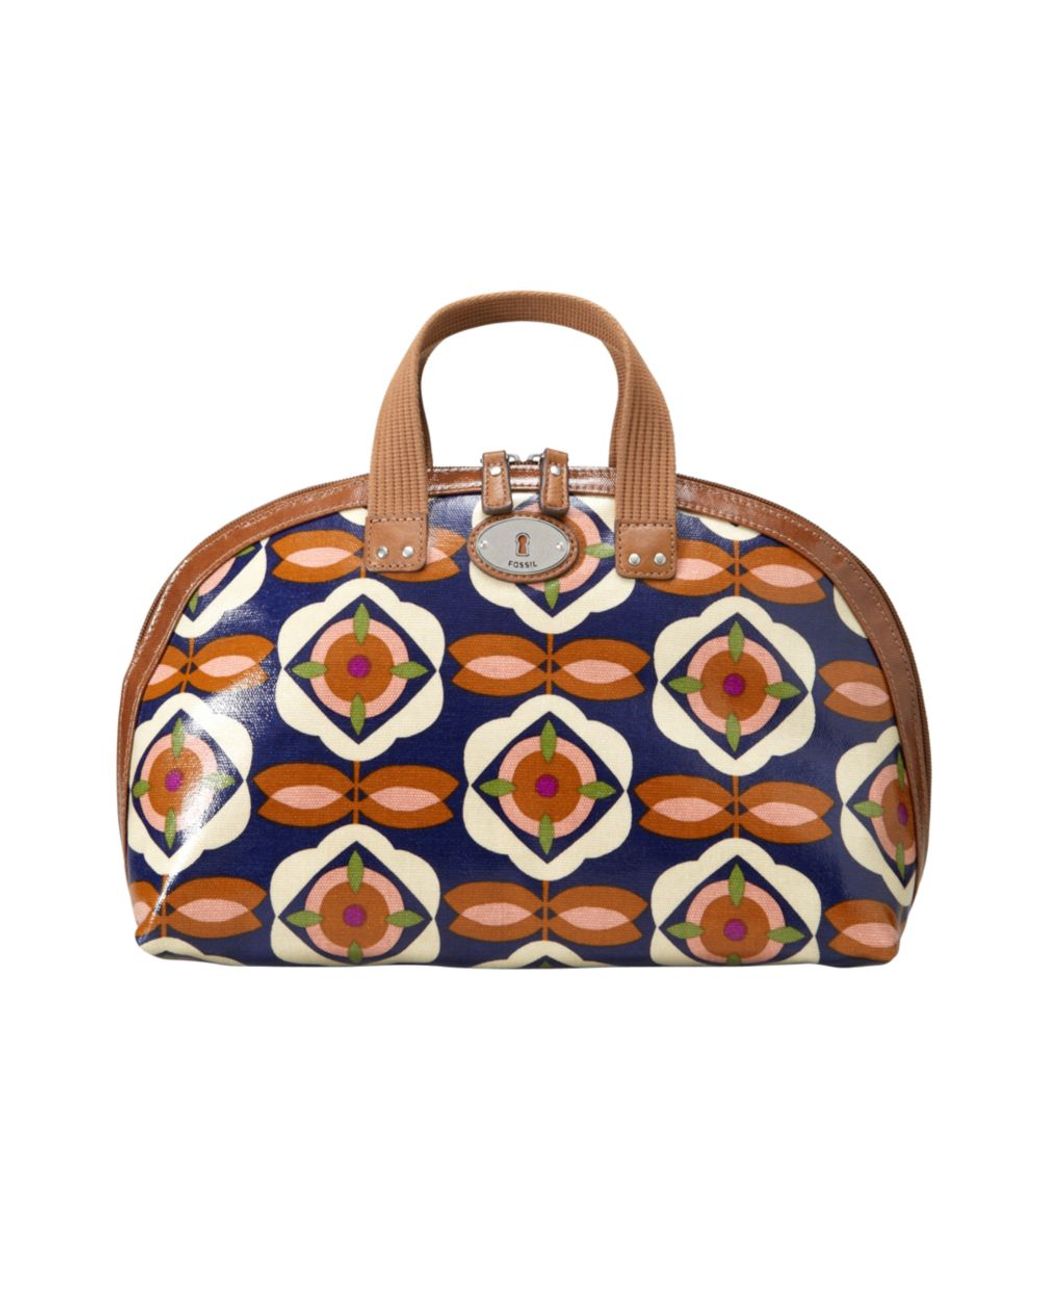 Fossil Keyper Print Dome Cosmetic Bag in Brown | Lyst